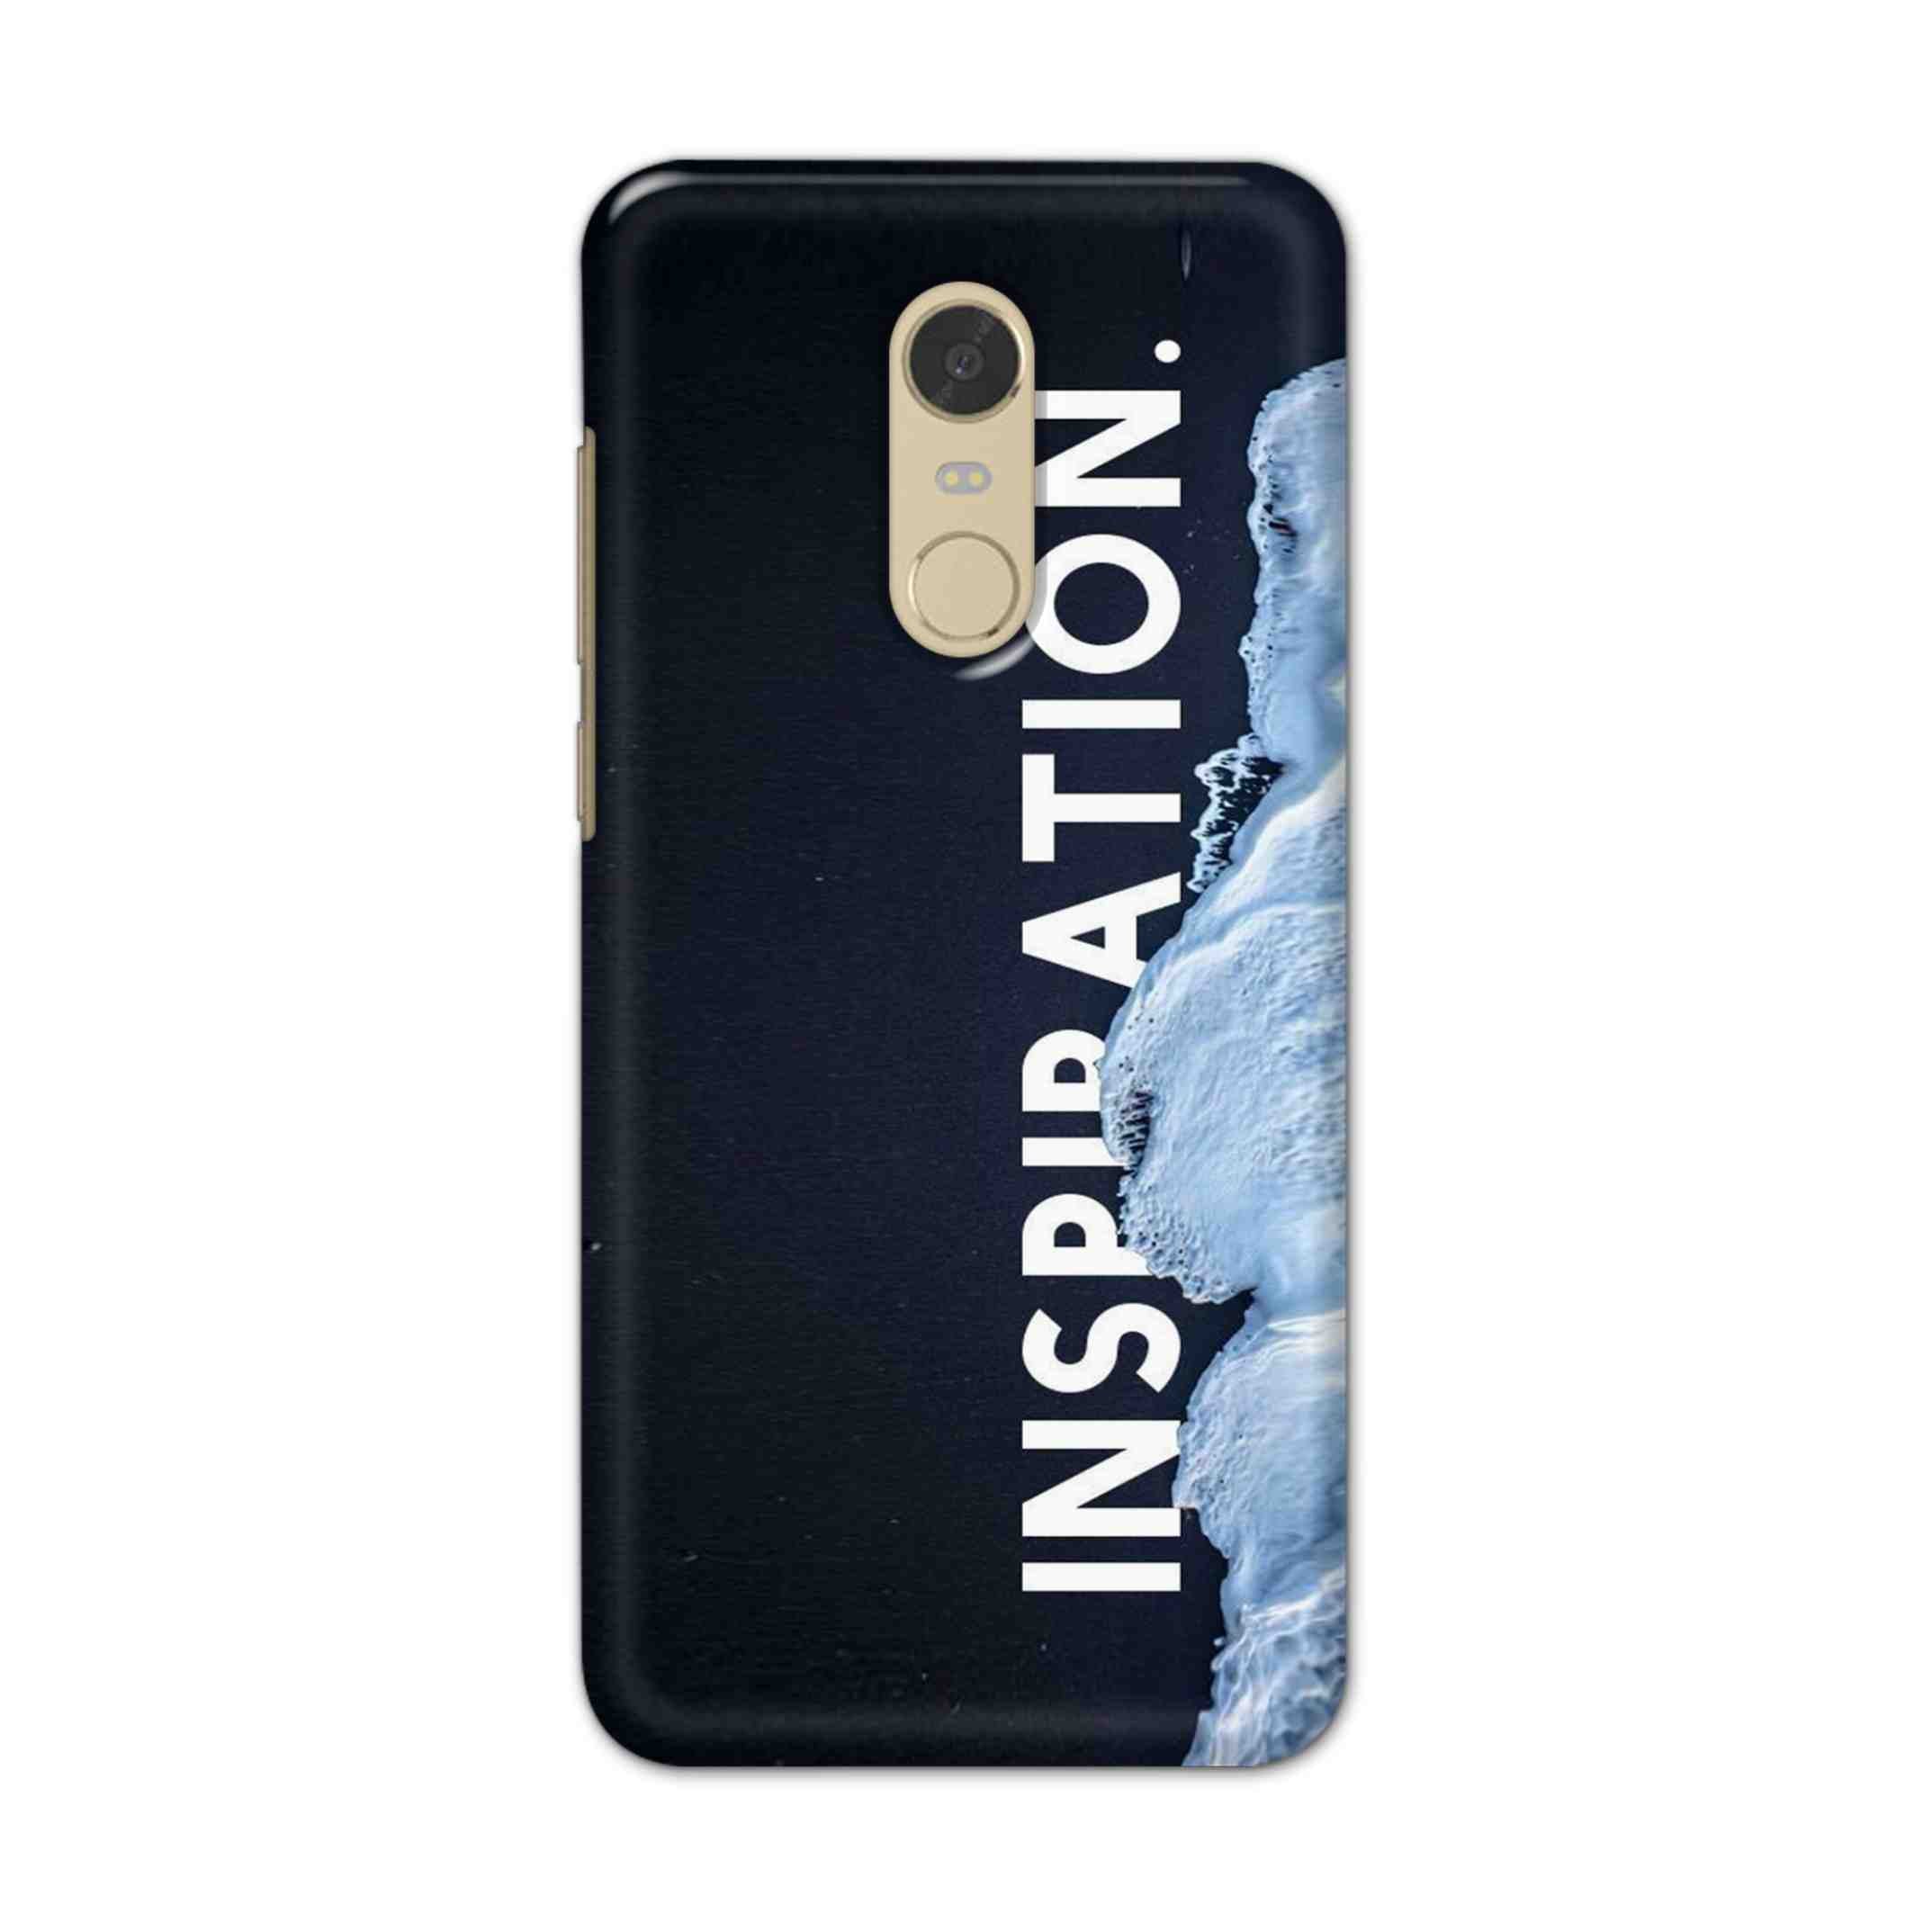 Buy Inspiration Hard Back Mobile Phone Case/Cover For Redmi Note 6 Online